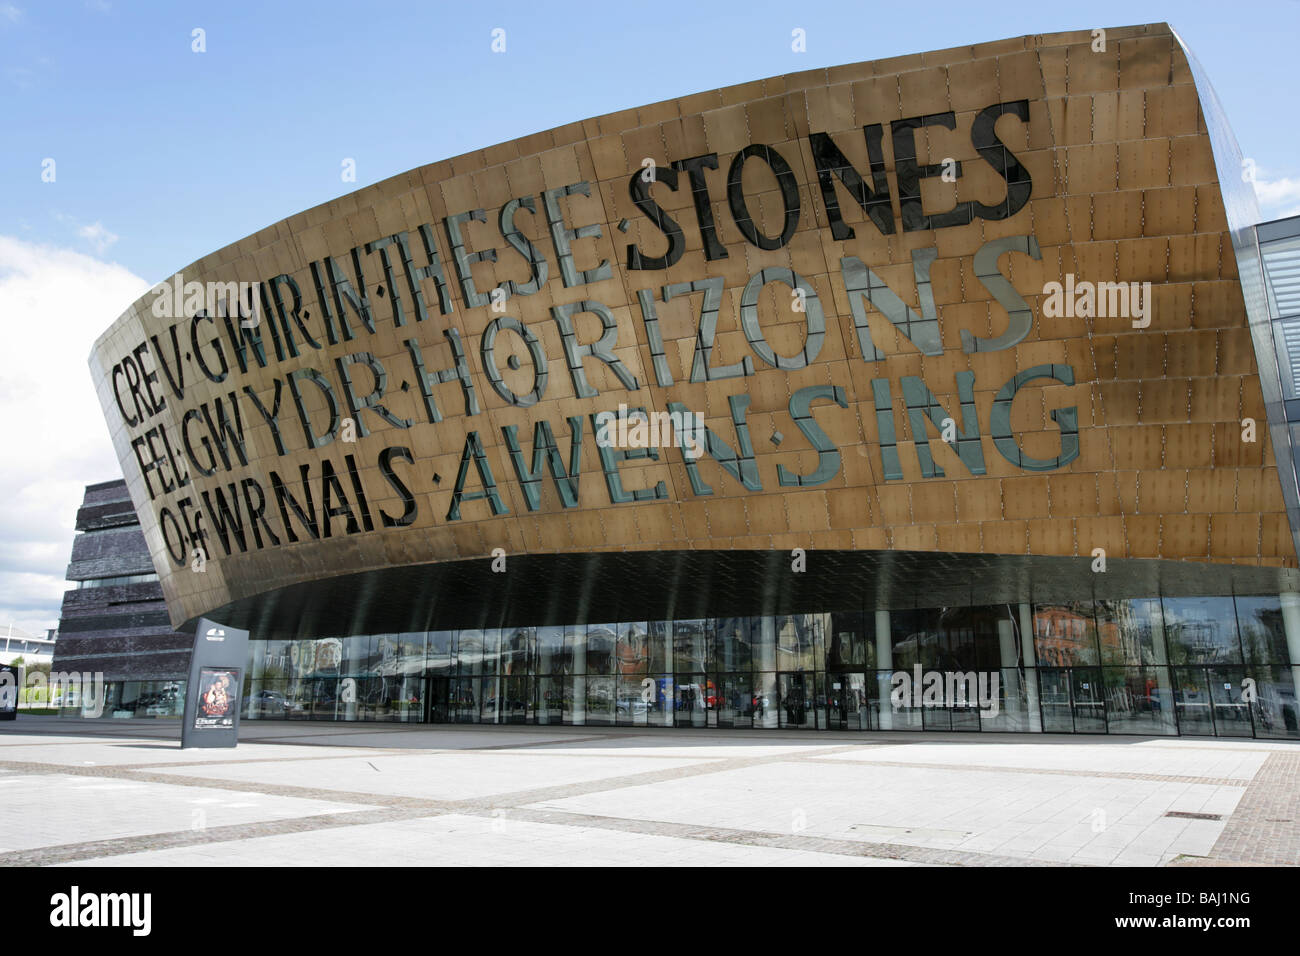 City of Cardiff, Wales. The Jonathan Adams designed Wales Millennium Centre at Cardiff Bay waterfront. Stock Photo